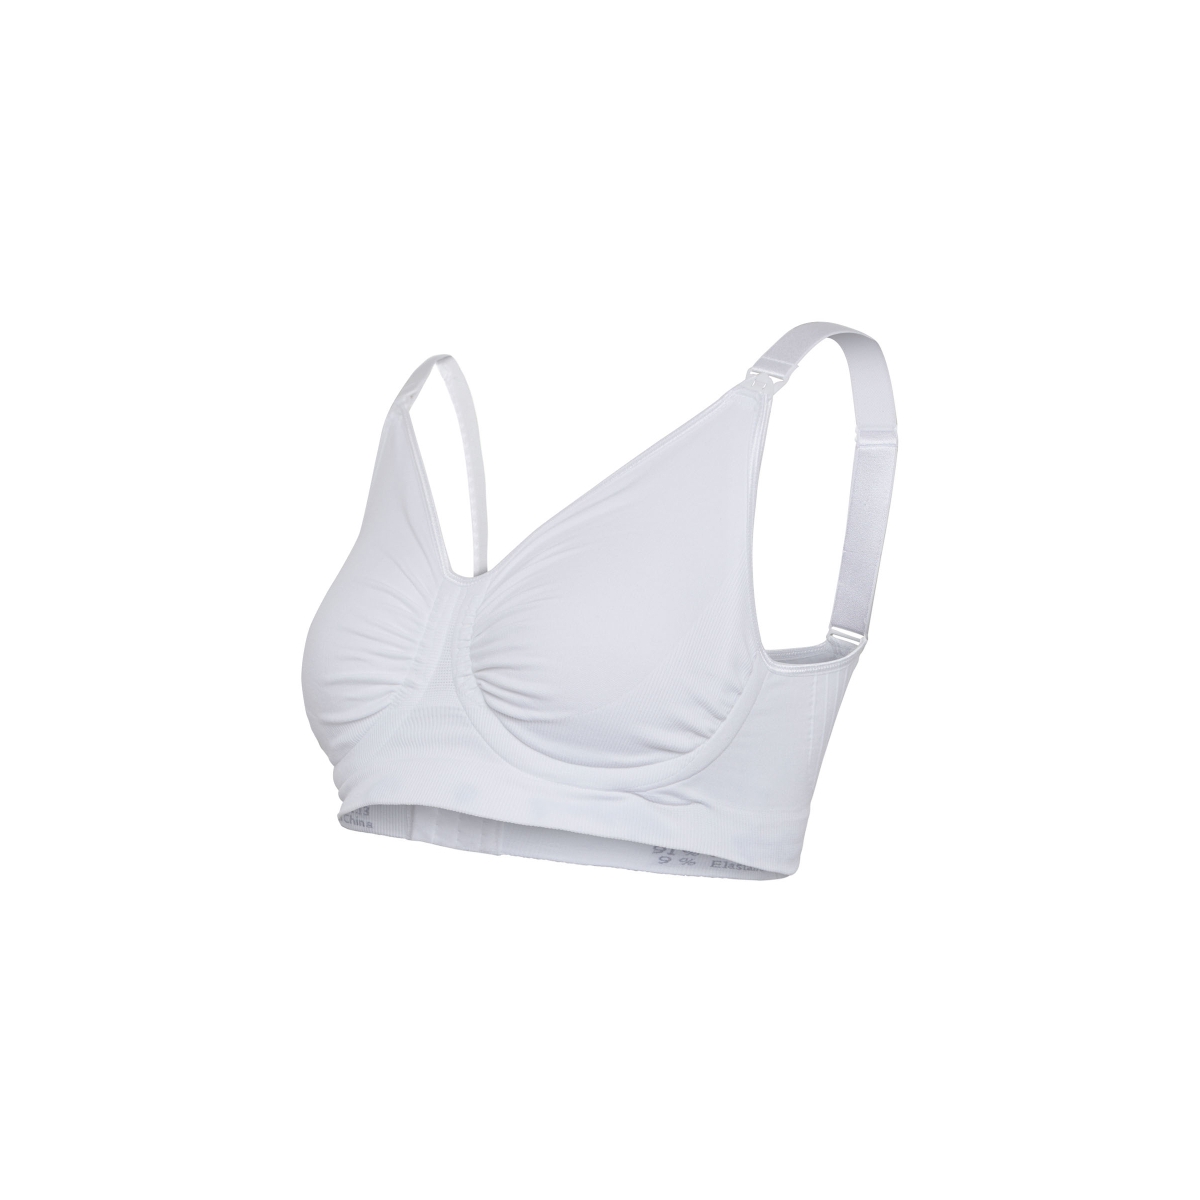 Carriwell Maternity & Nursing Bra with Padded Carri-Gel Support - White (Size